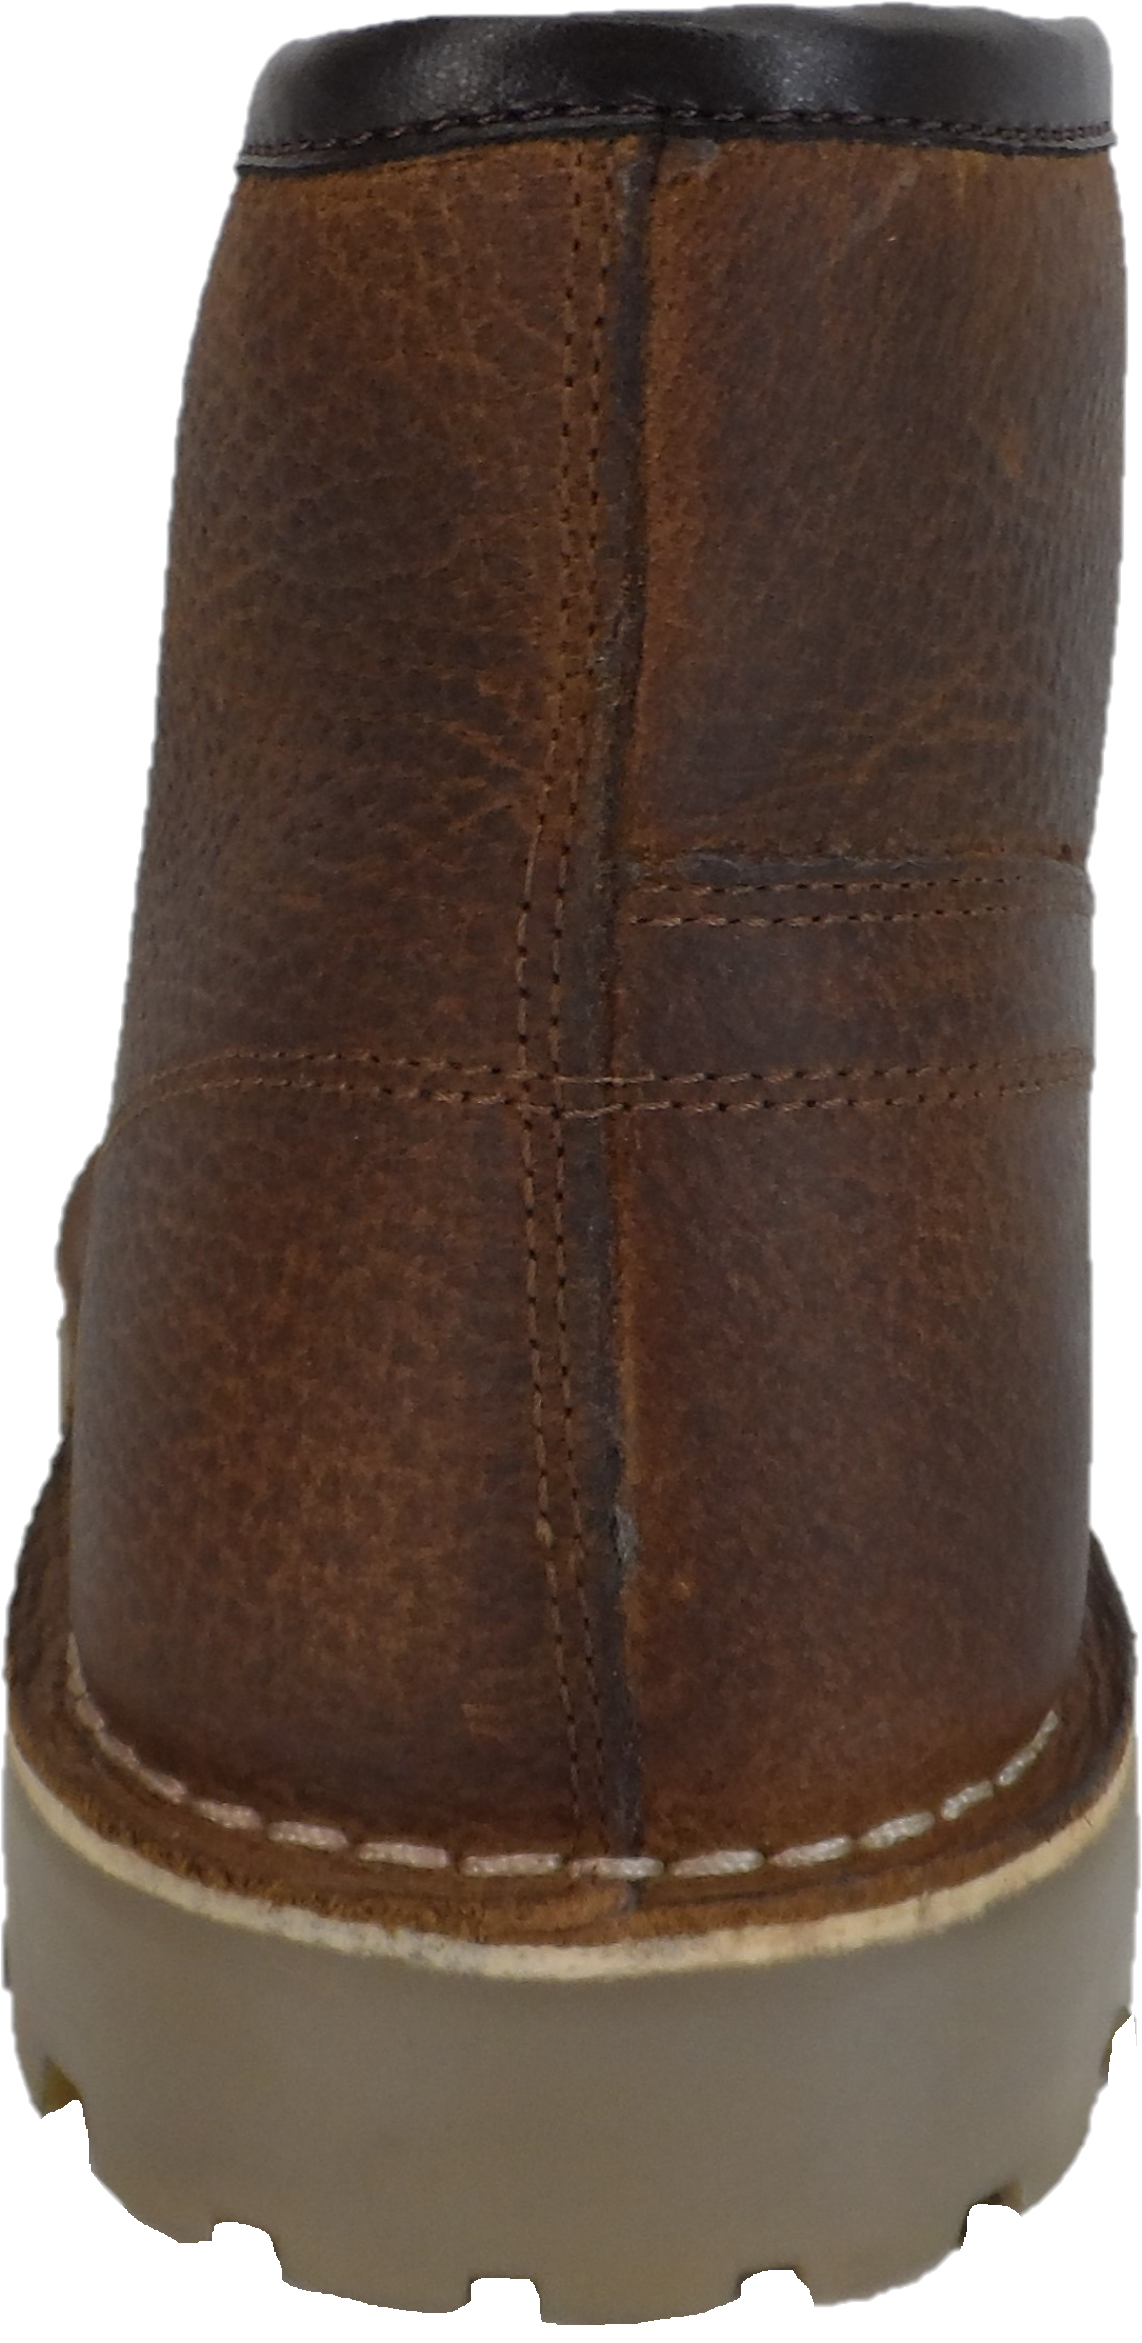 Original 1970's Style Brown Grain Leather Monkey Boots